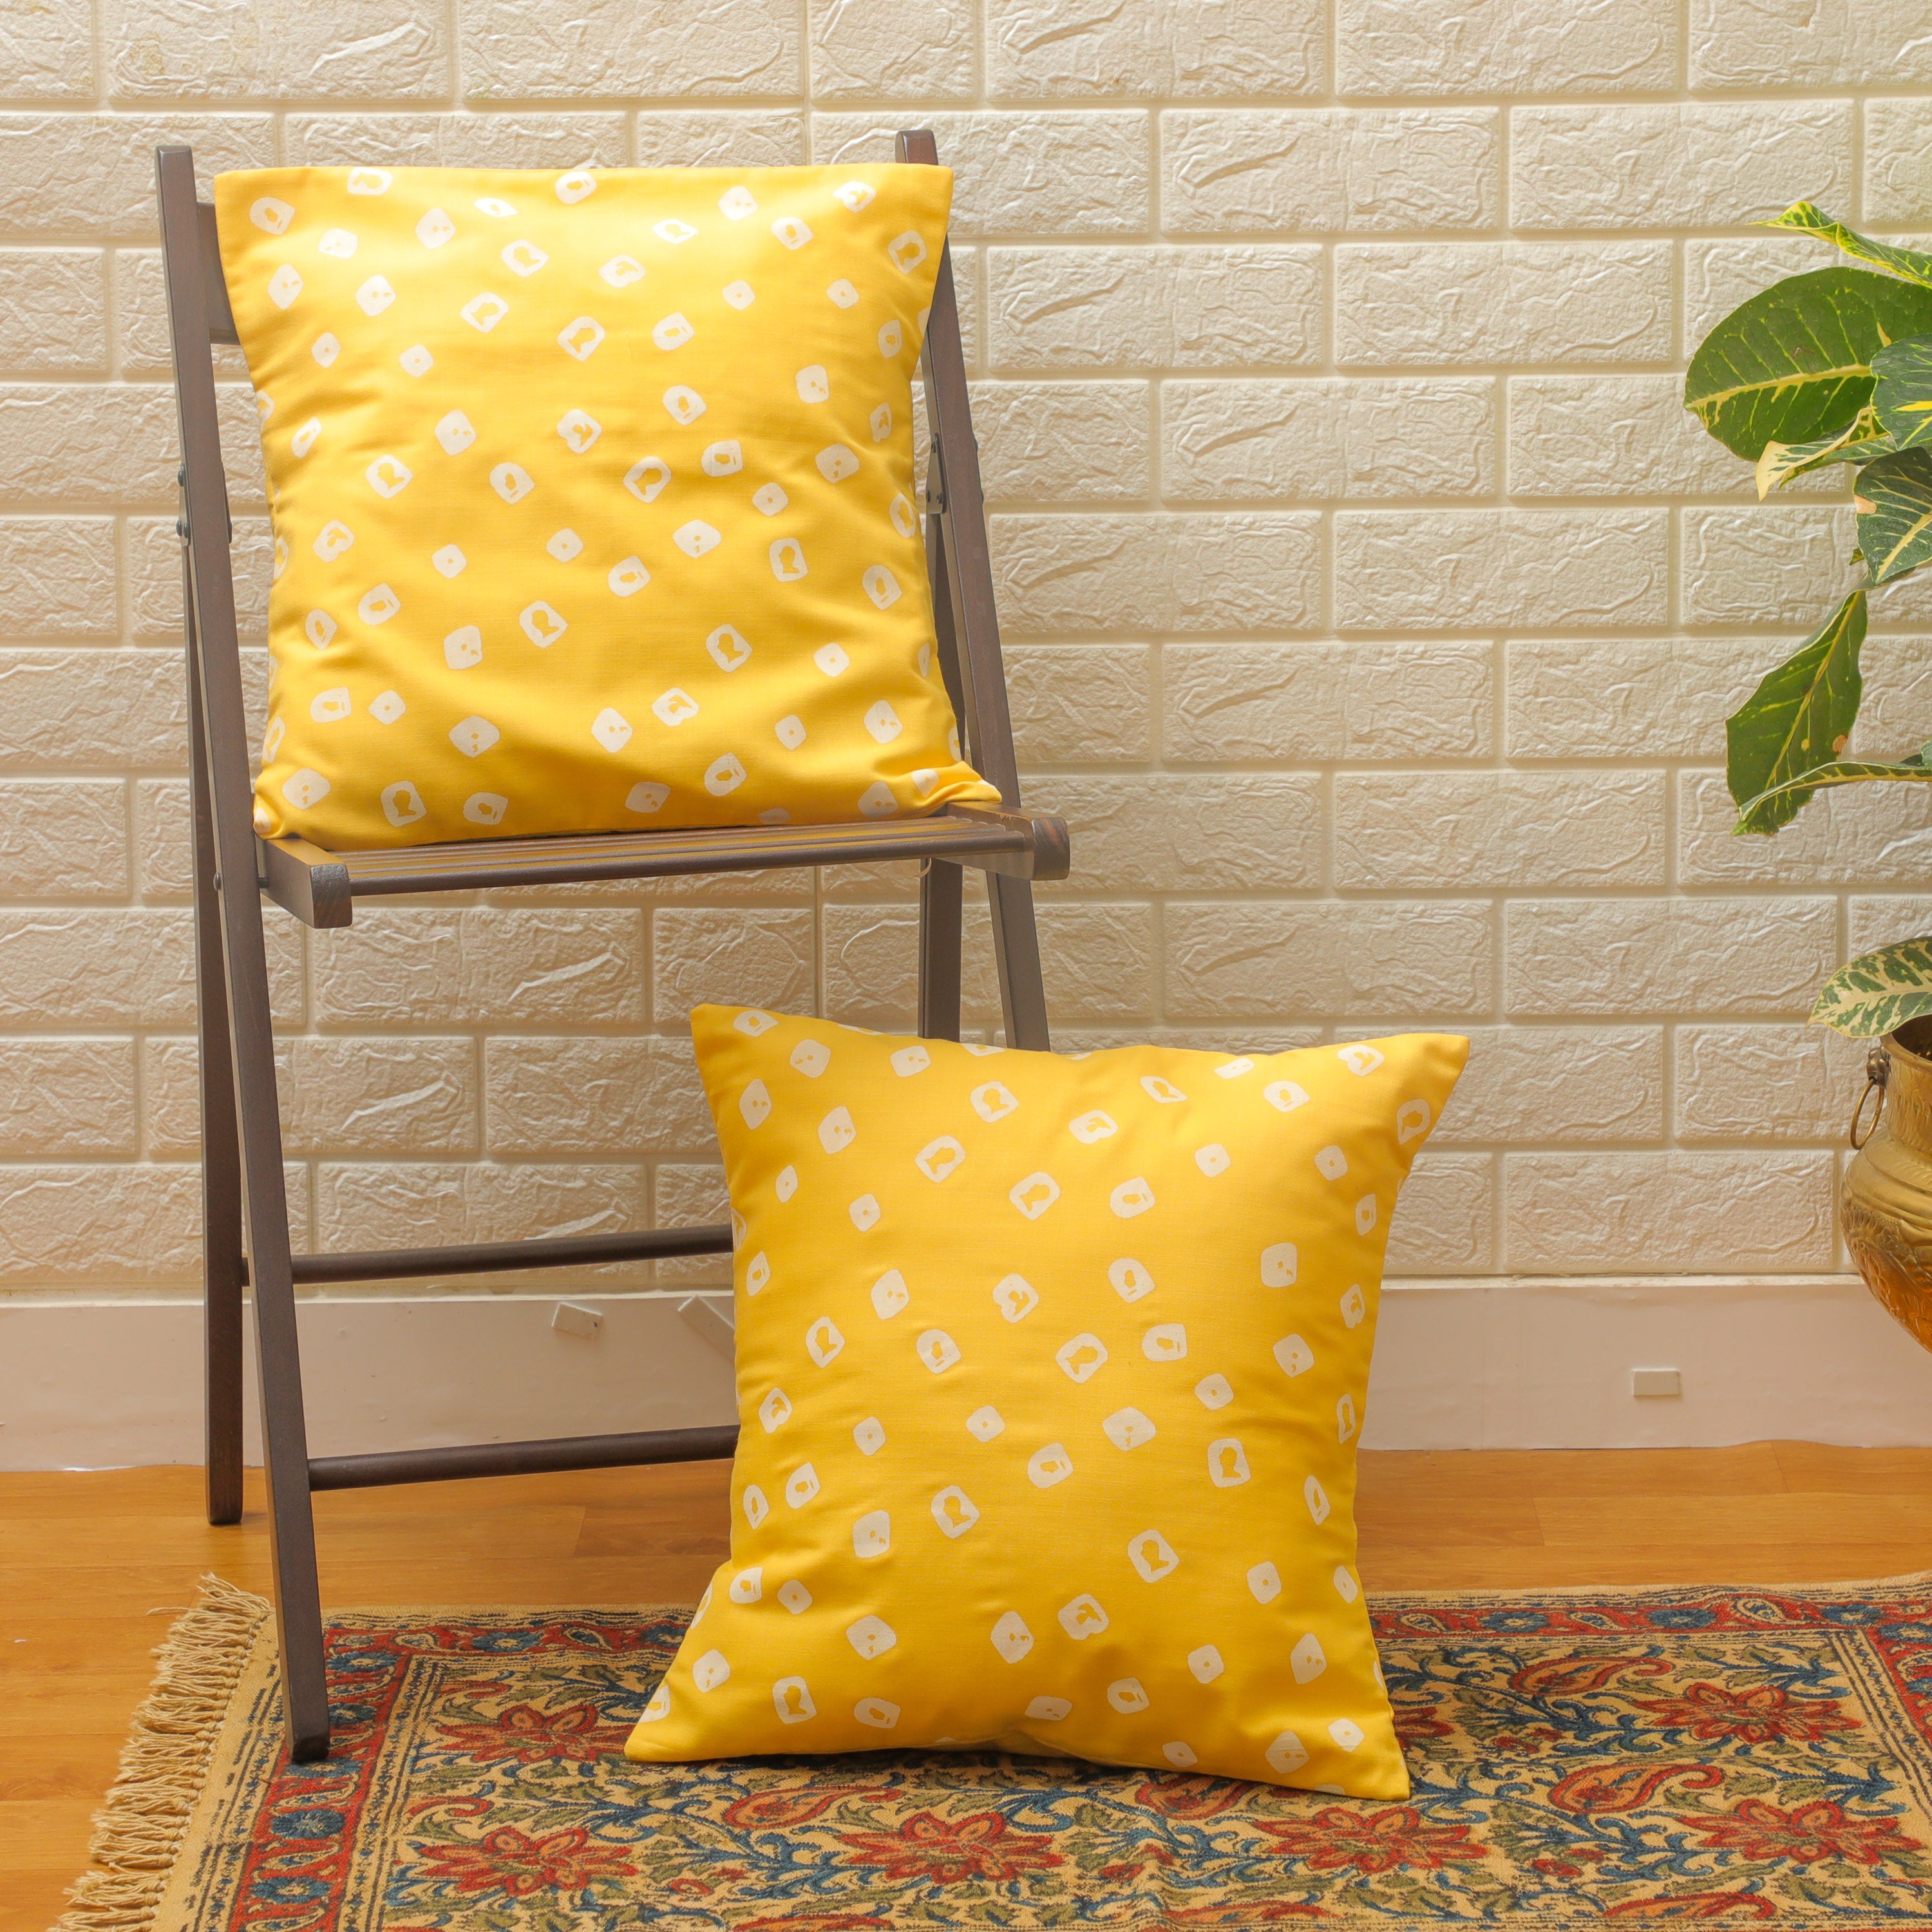 Bandhini cotton printed cushion with white print on a yellow background.